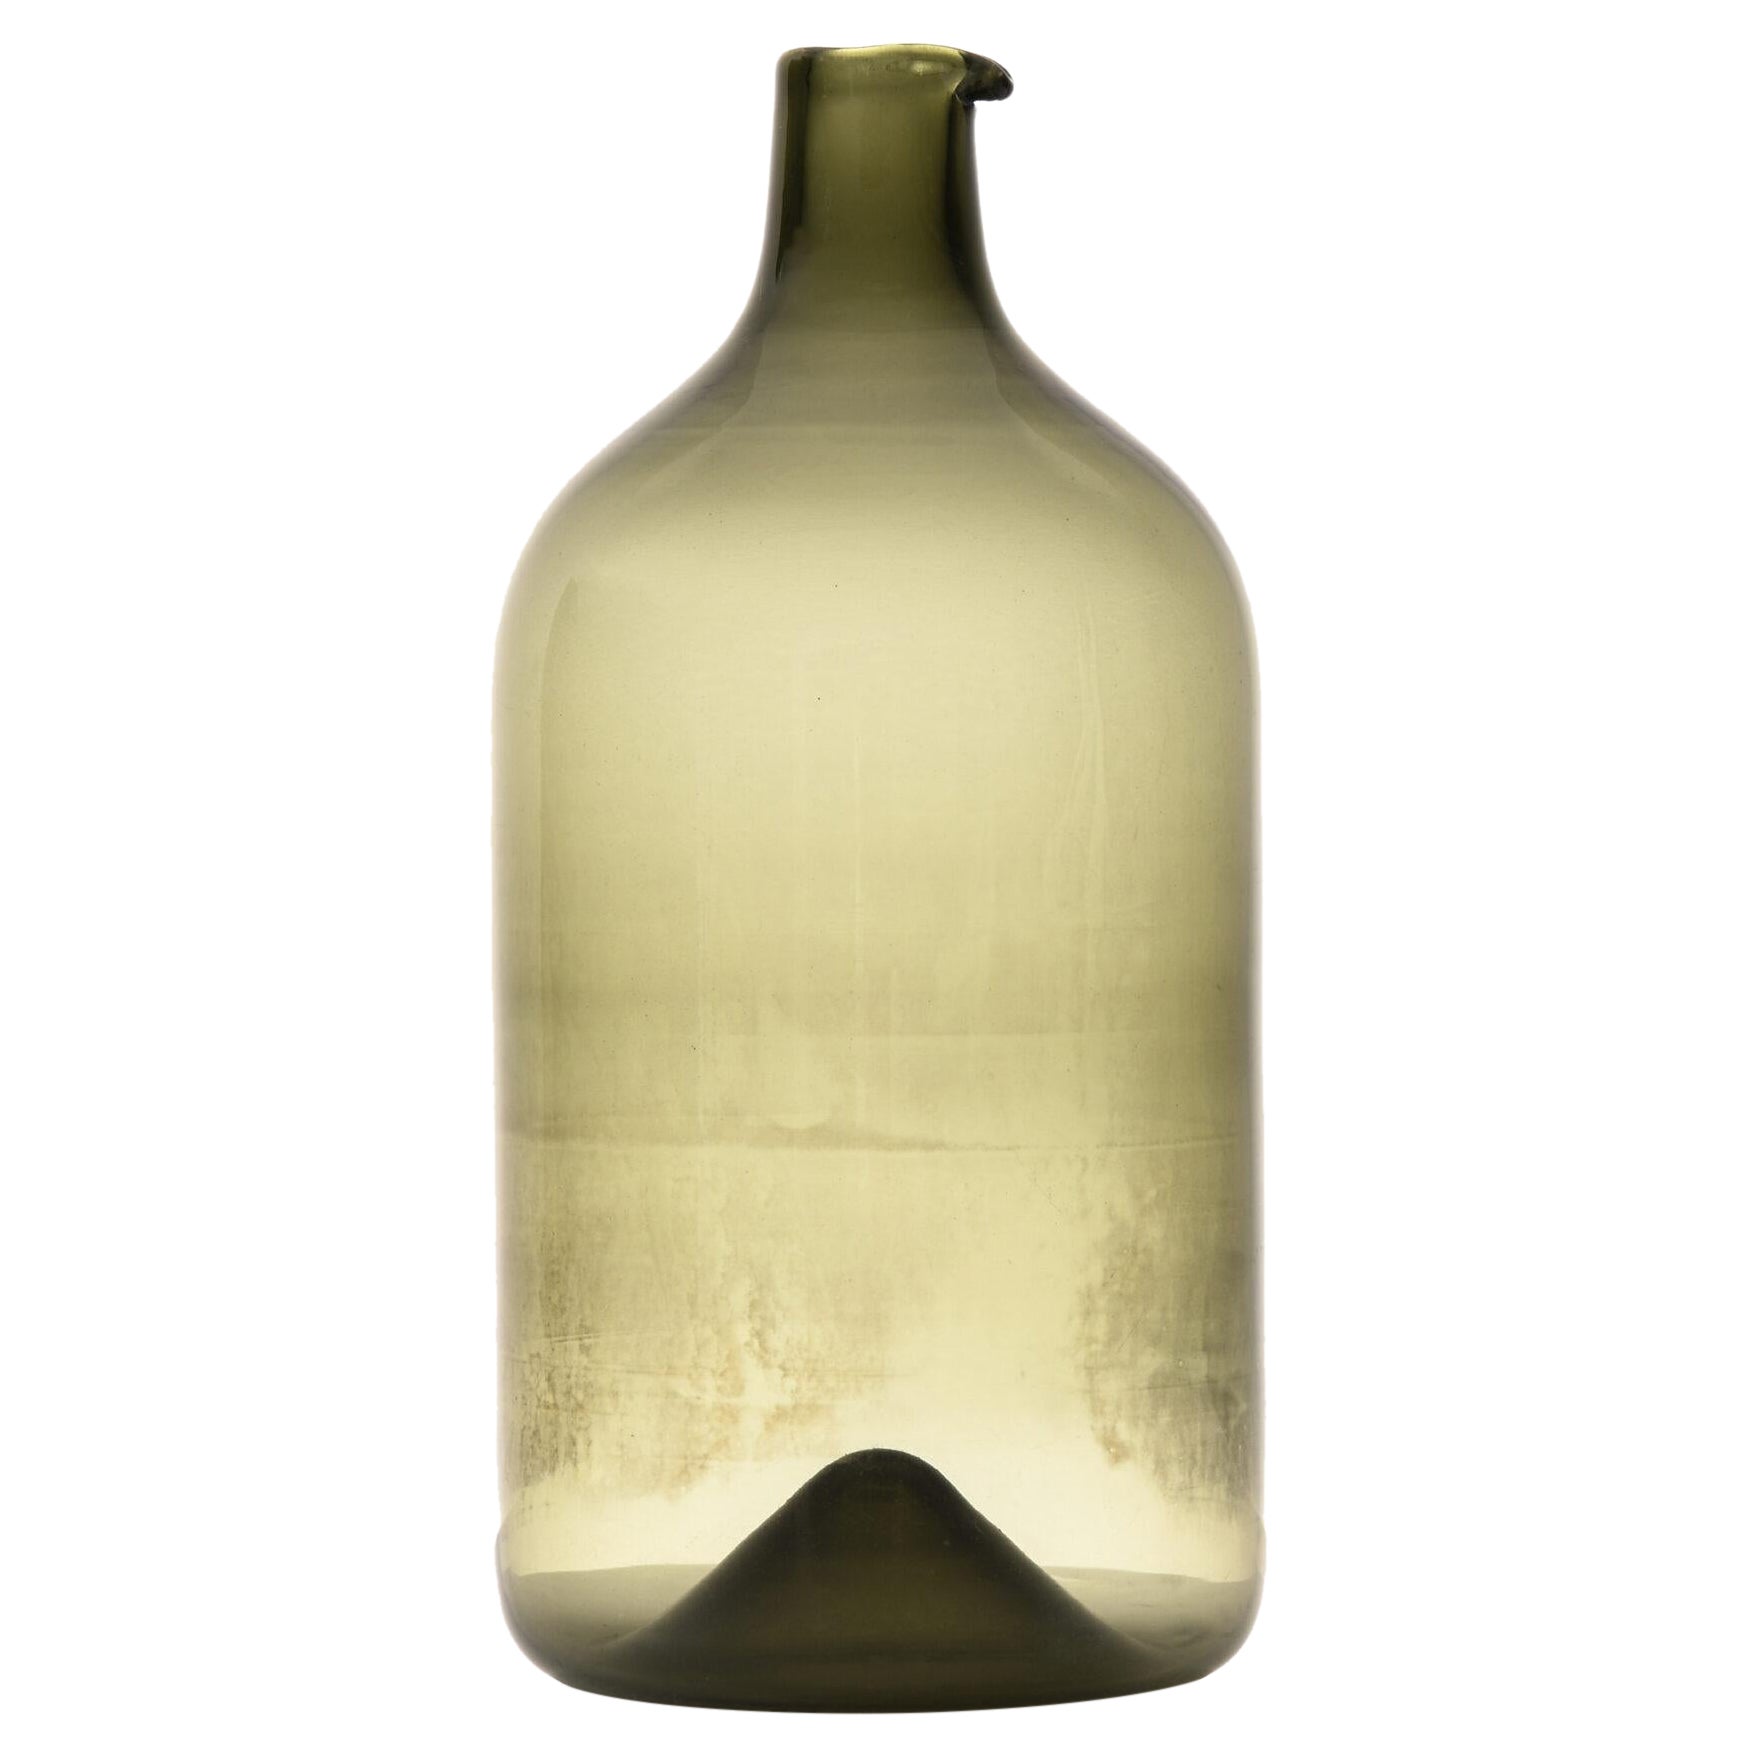 Timo Sarpaneva Bottle / Vase Model Pullo Produced by Iittala in Finland For Sale